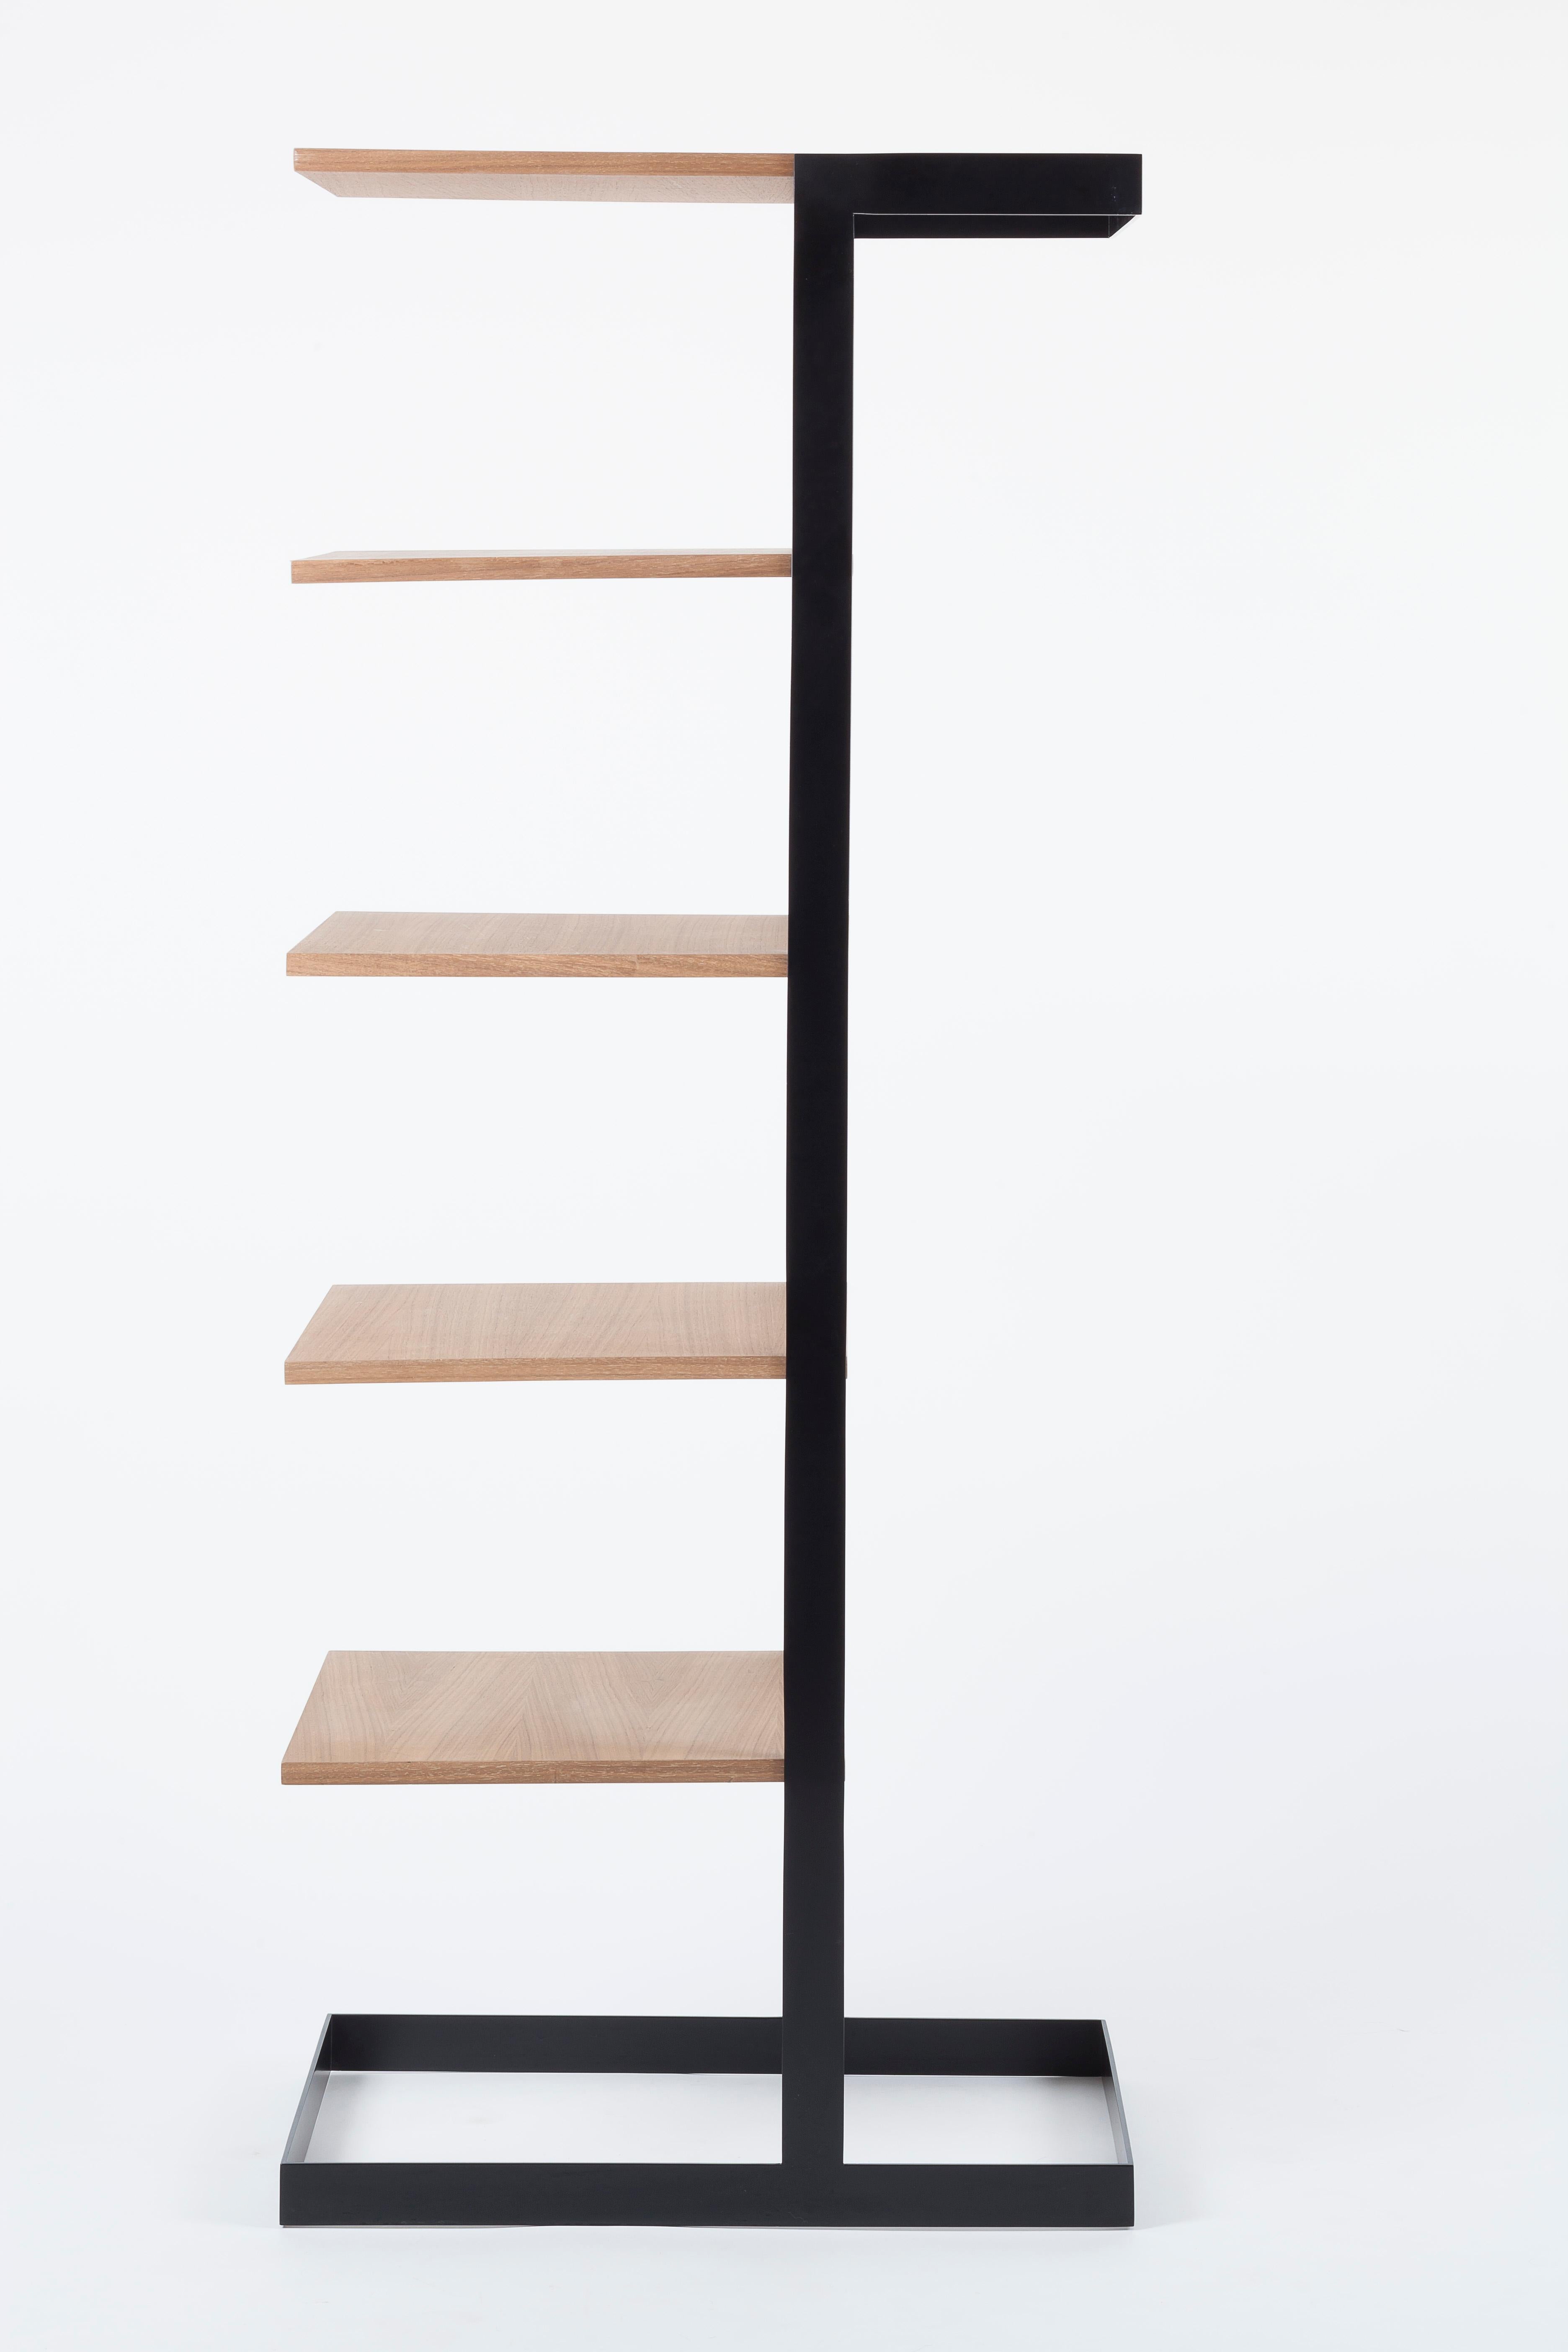 The Severin Shelf combines 5 shelves on one side with a clothes hanging area on the other. It can be placed in an entranceway to store coats, hats & scarves, or in a bedroom for quick acces to one’s most frequently used clothes. The richness of its